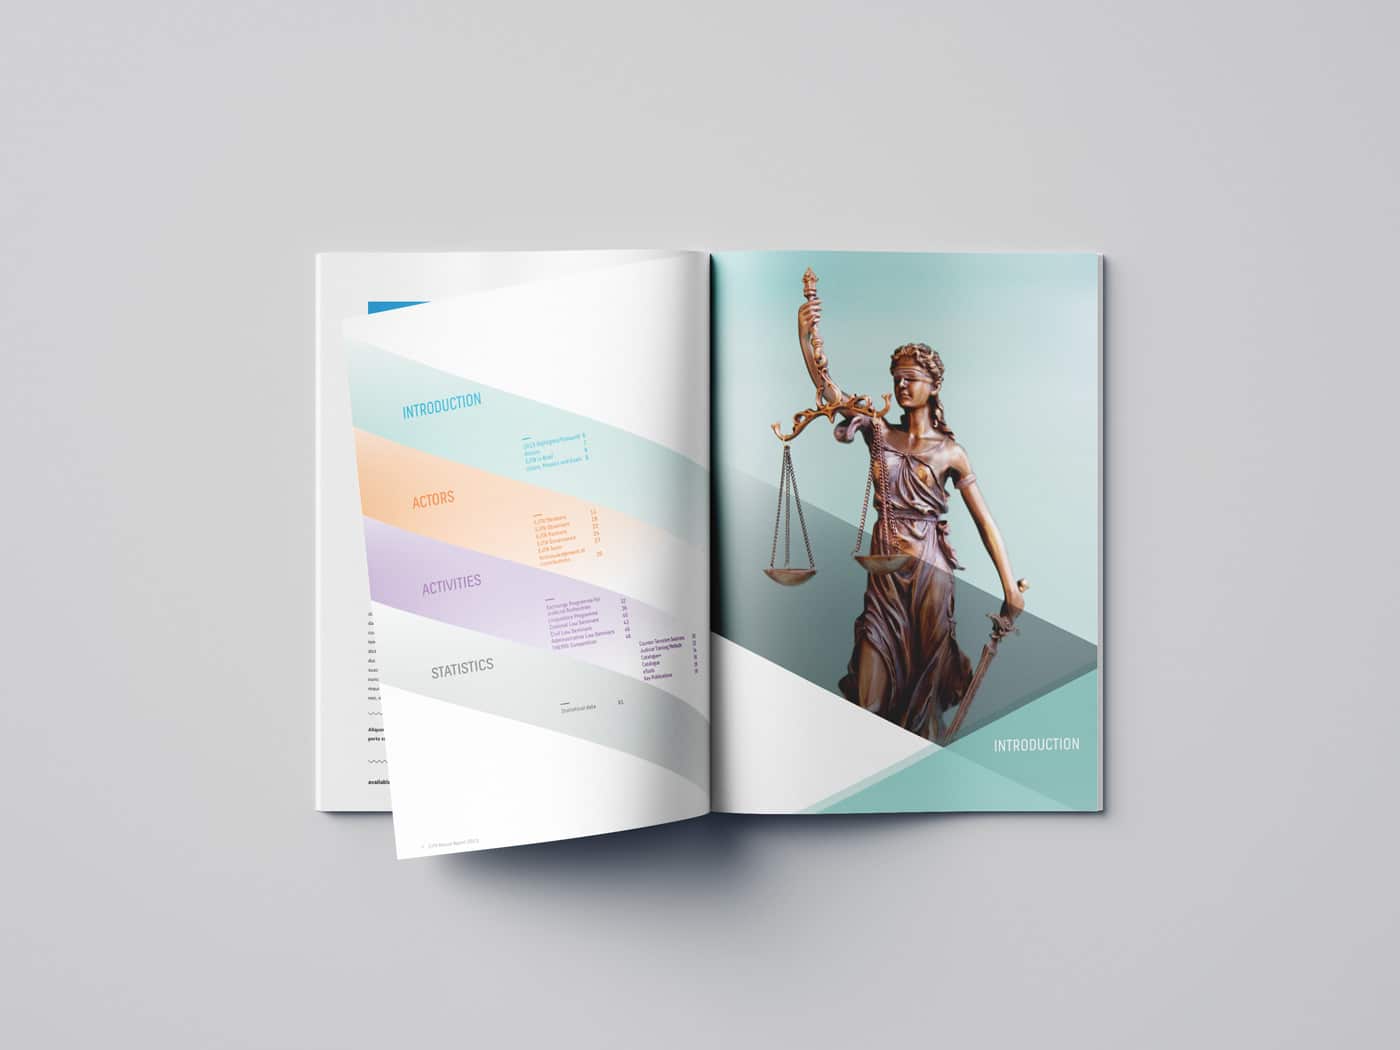 Ejtn annual report pages graphic web designer brussels simpl-Simpl. SRL is a graphic design studio in Brussels